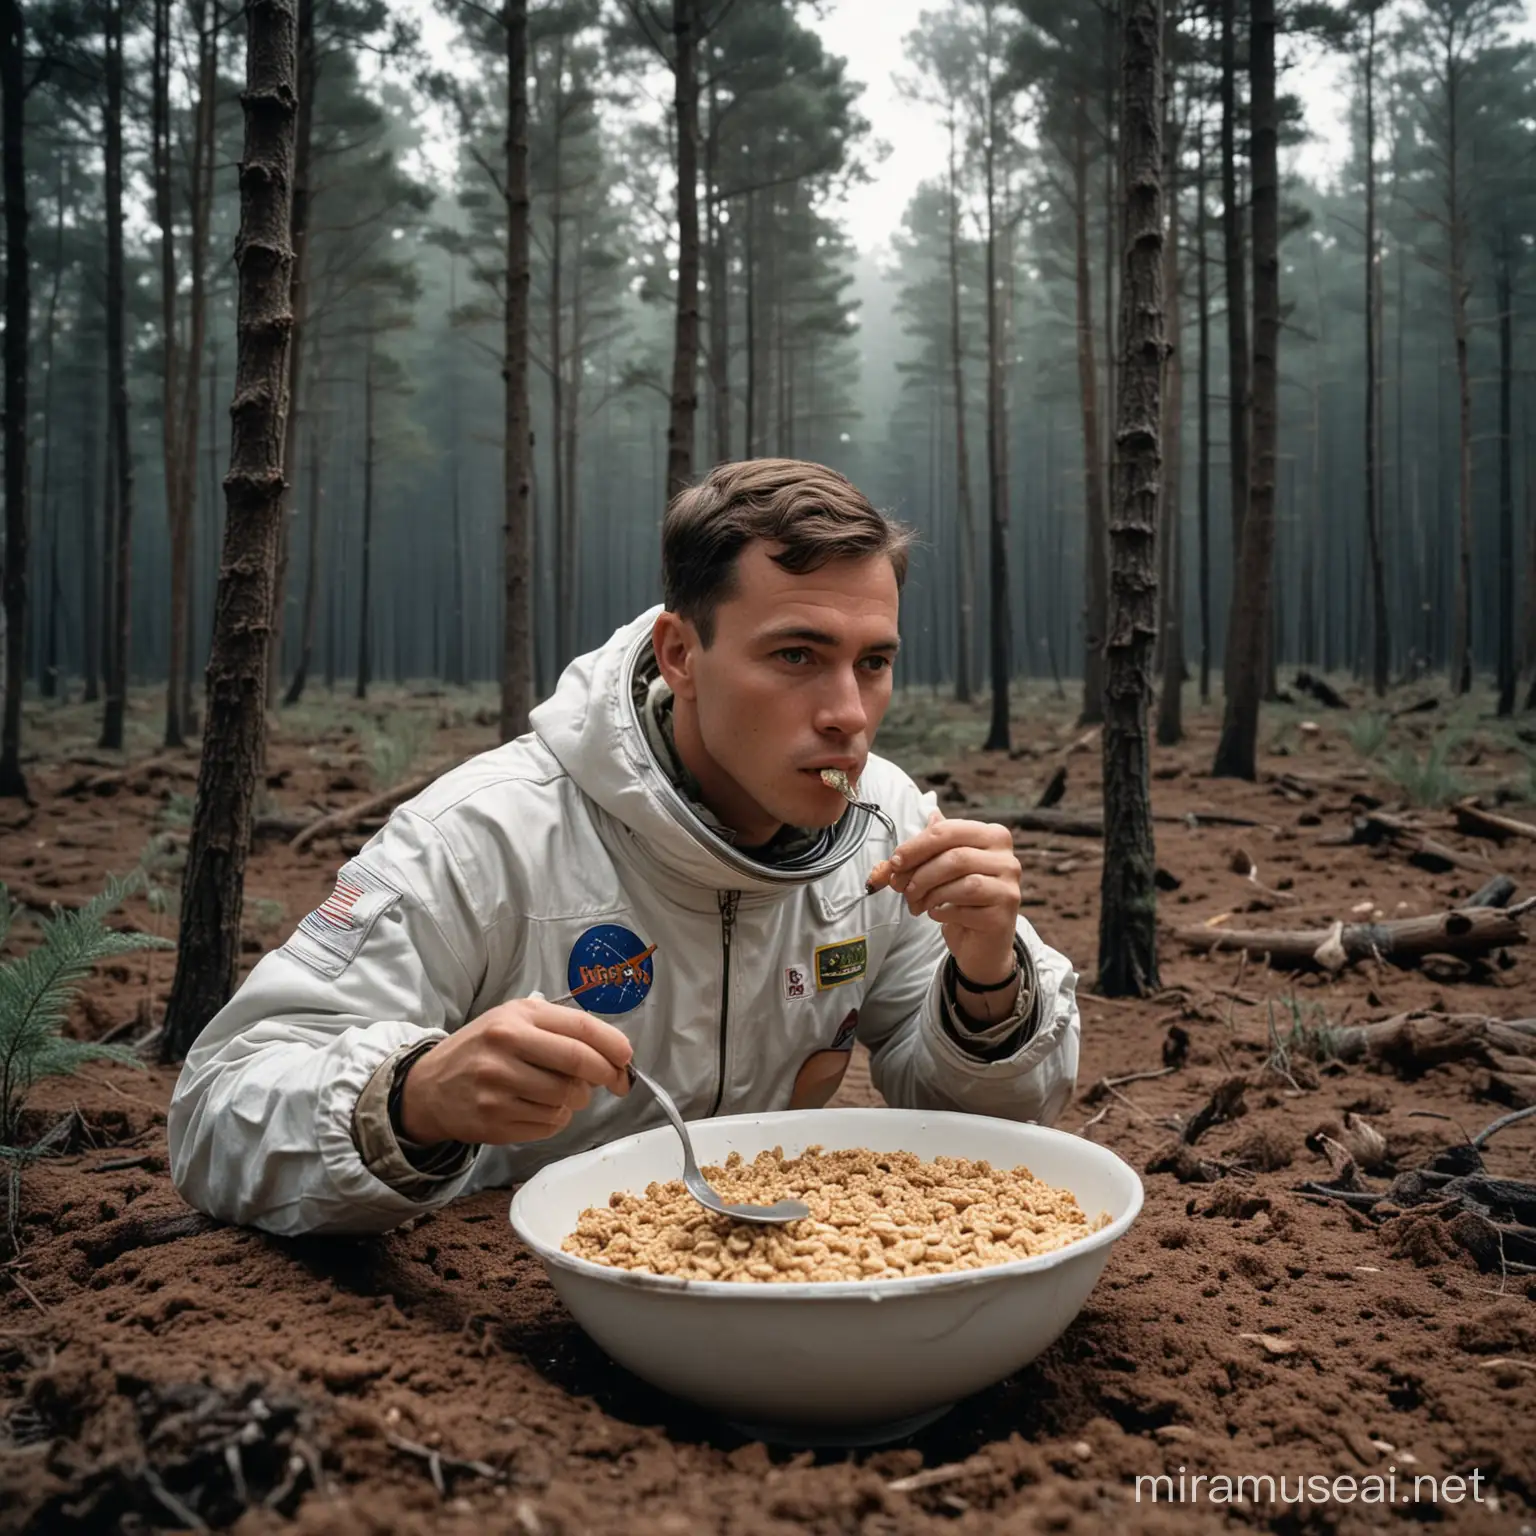 Eating Cereals Lunar Picnic in the Enchanted Forest